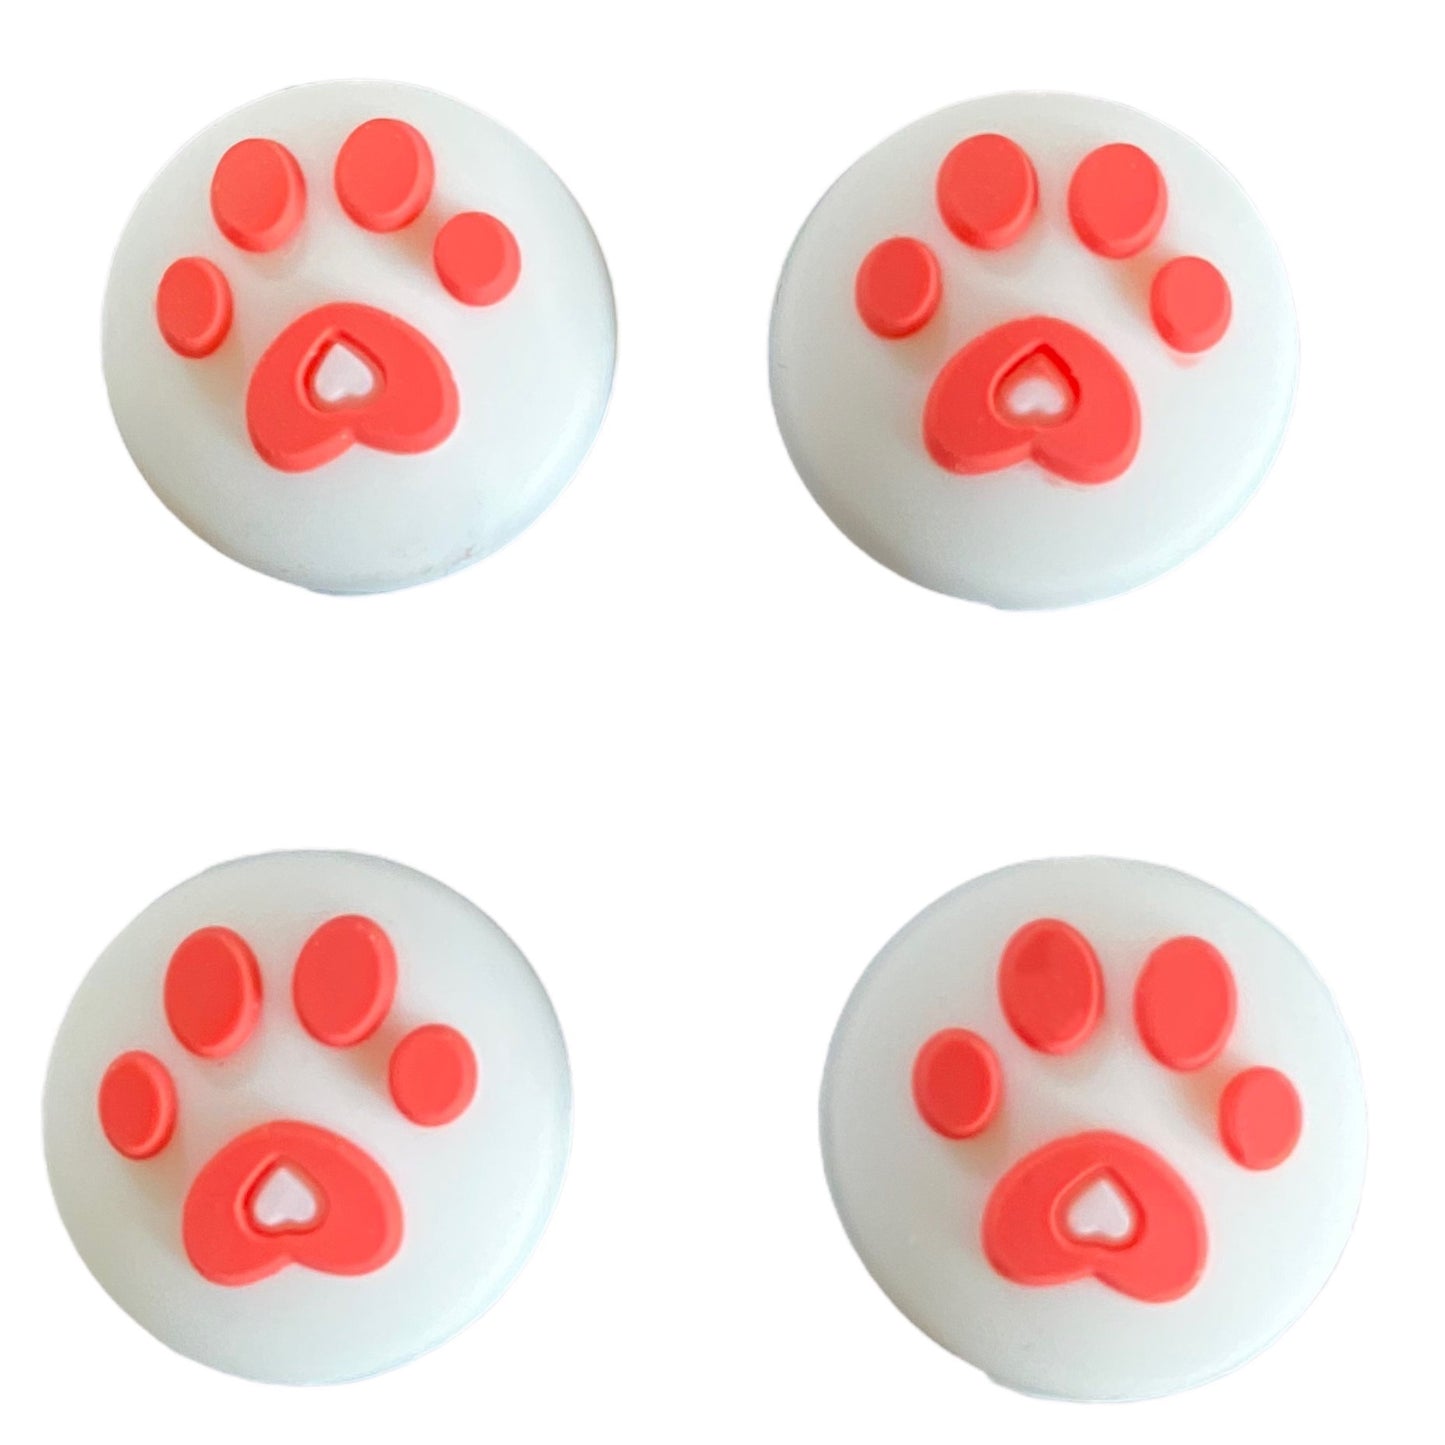 JenDore Red & White 4Pcs Paw Silicone Thumb Grip Caps for Nintendo Switch